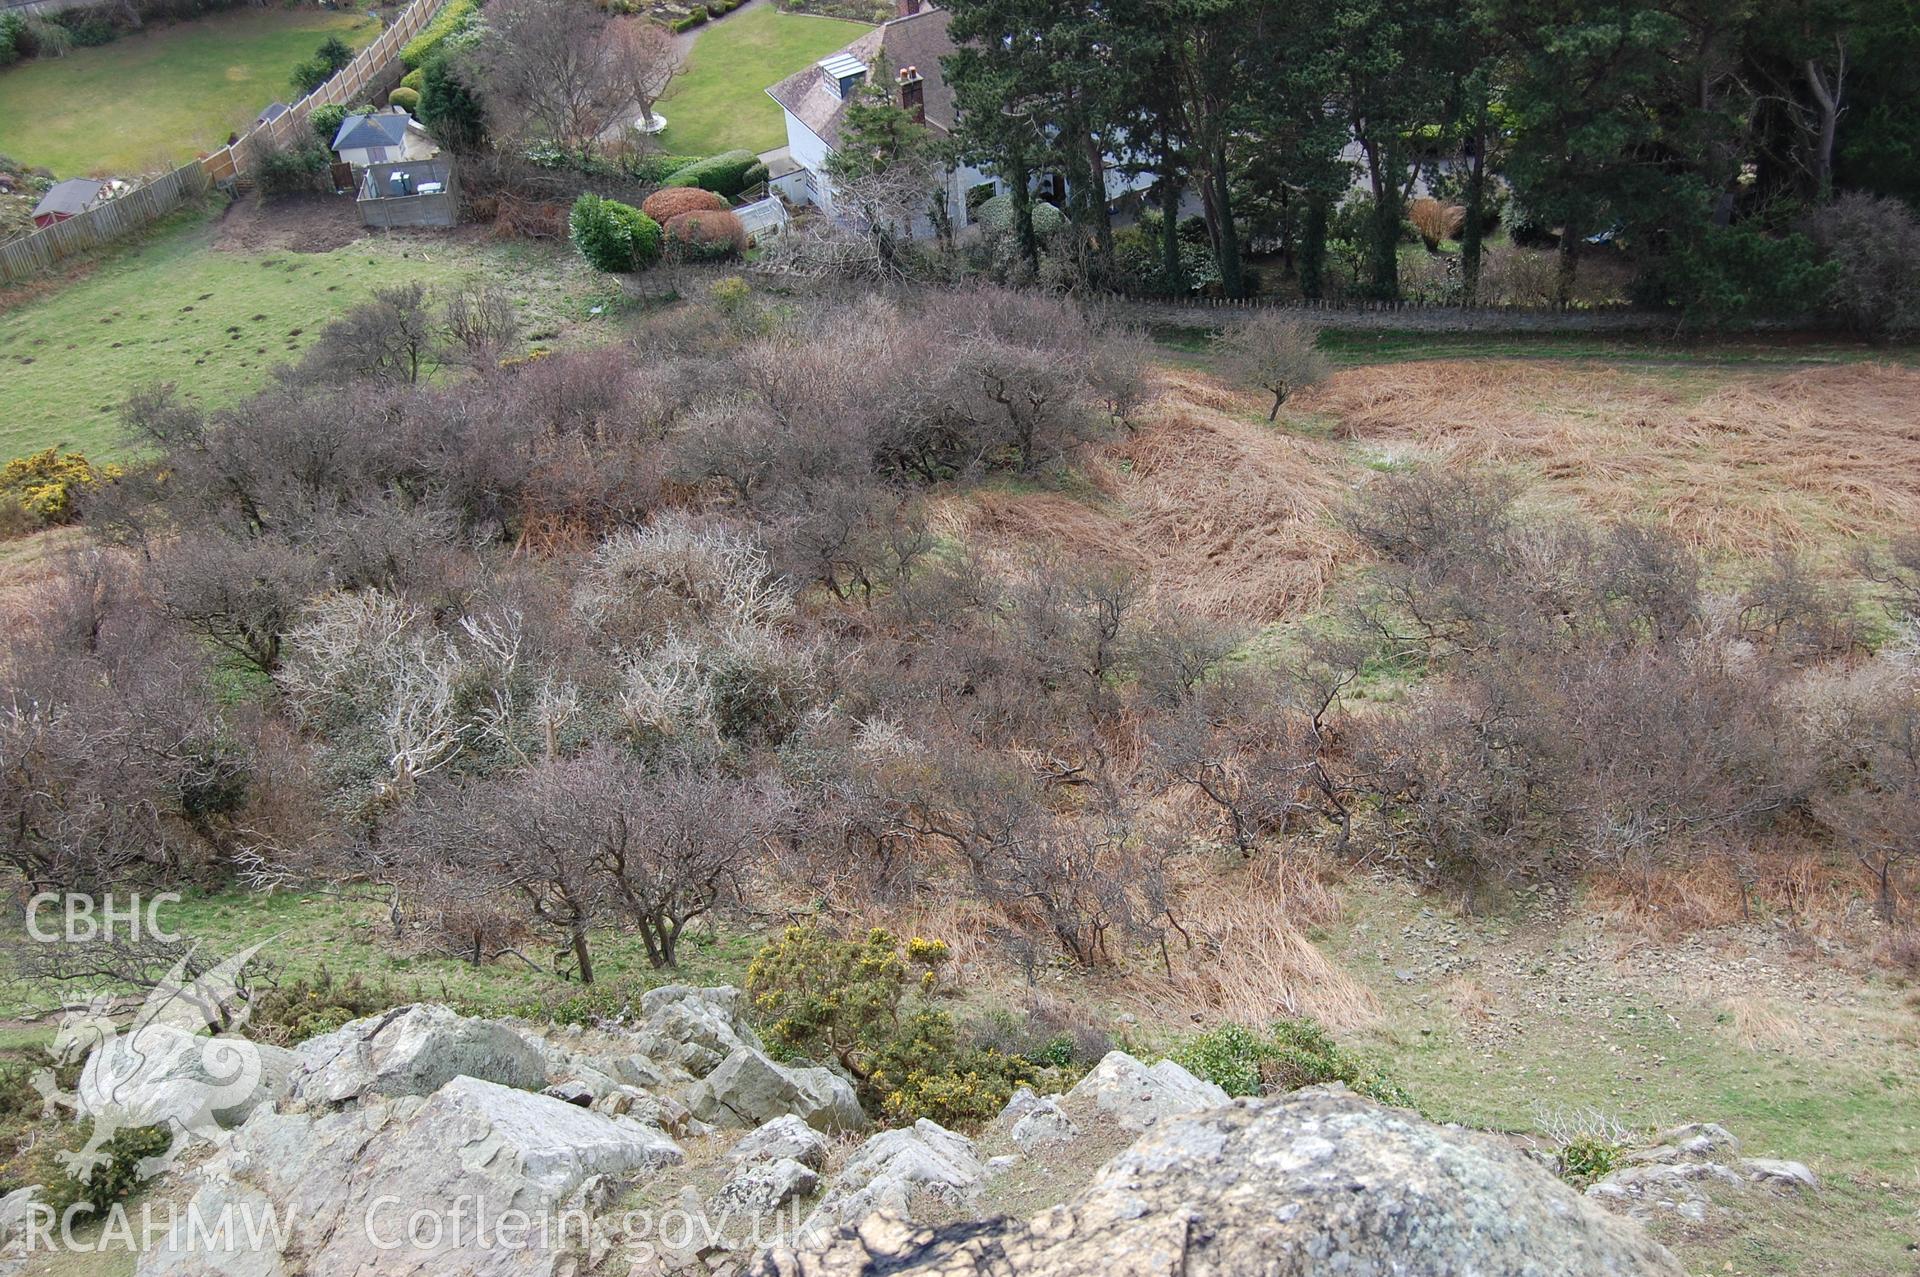 Digital photograph from an archaeological assessment of Deganwy Castle, carried out by Gwynedd Archaeological Trust, 2009. Construction inclines from above.